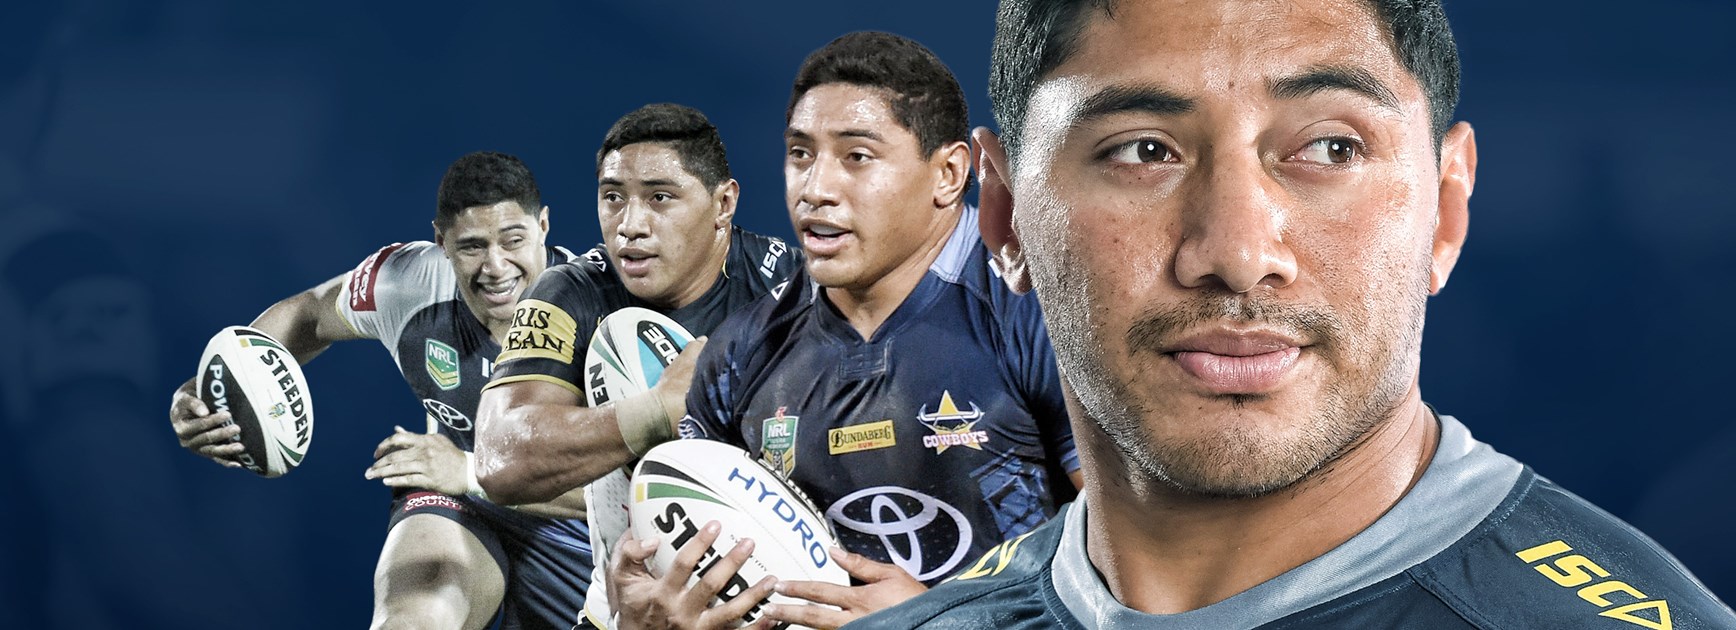 Why Taumalolo's best may be yet to come